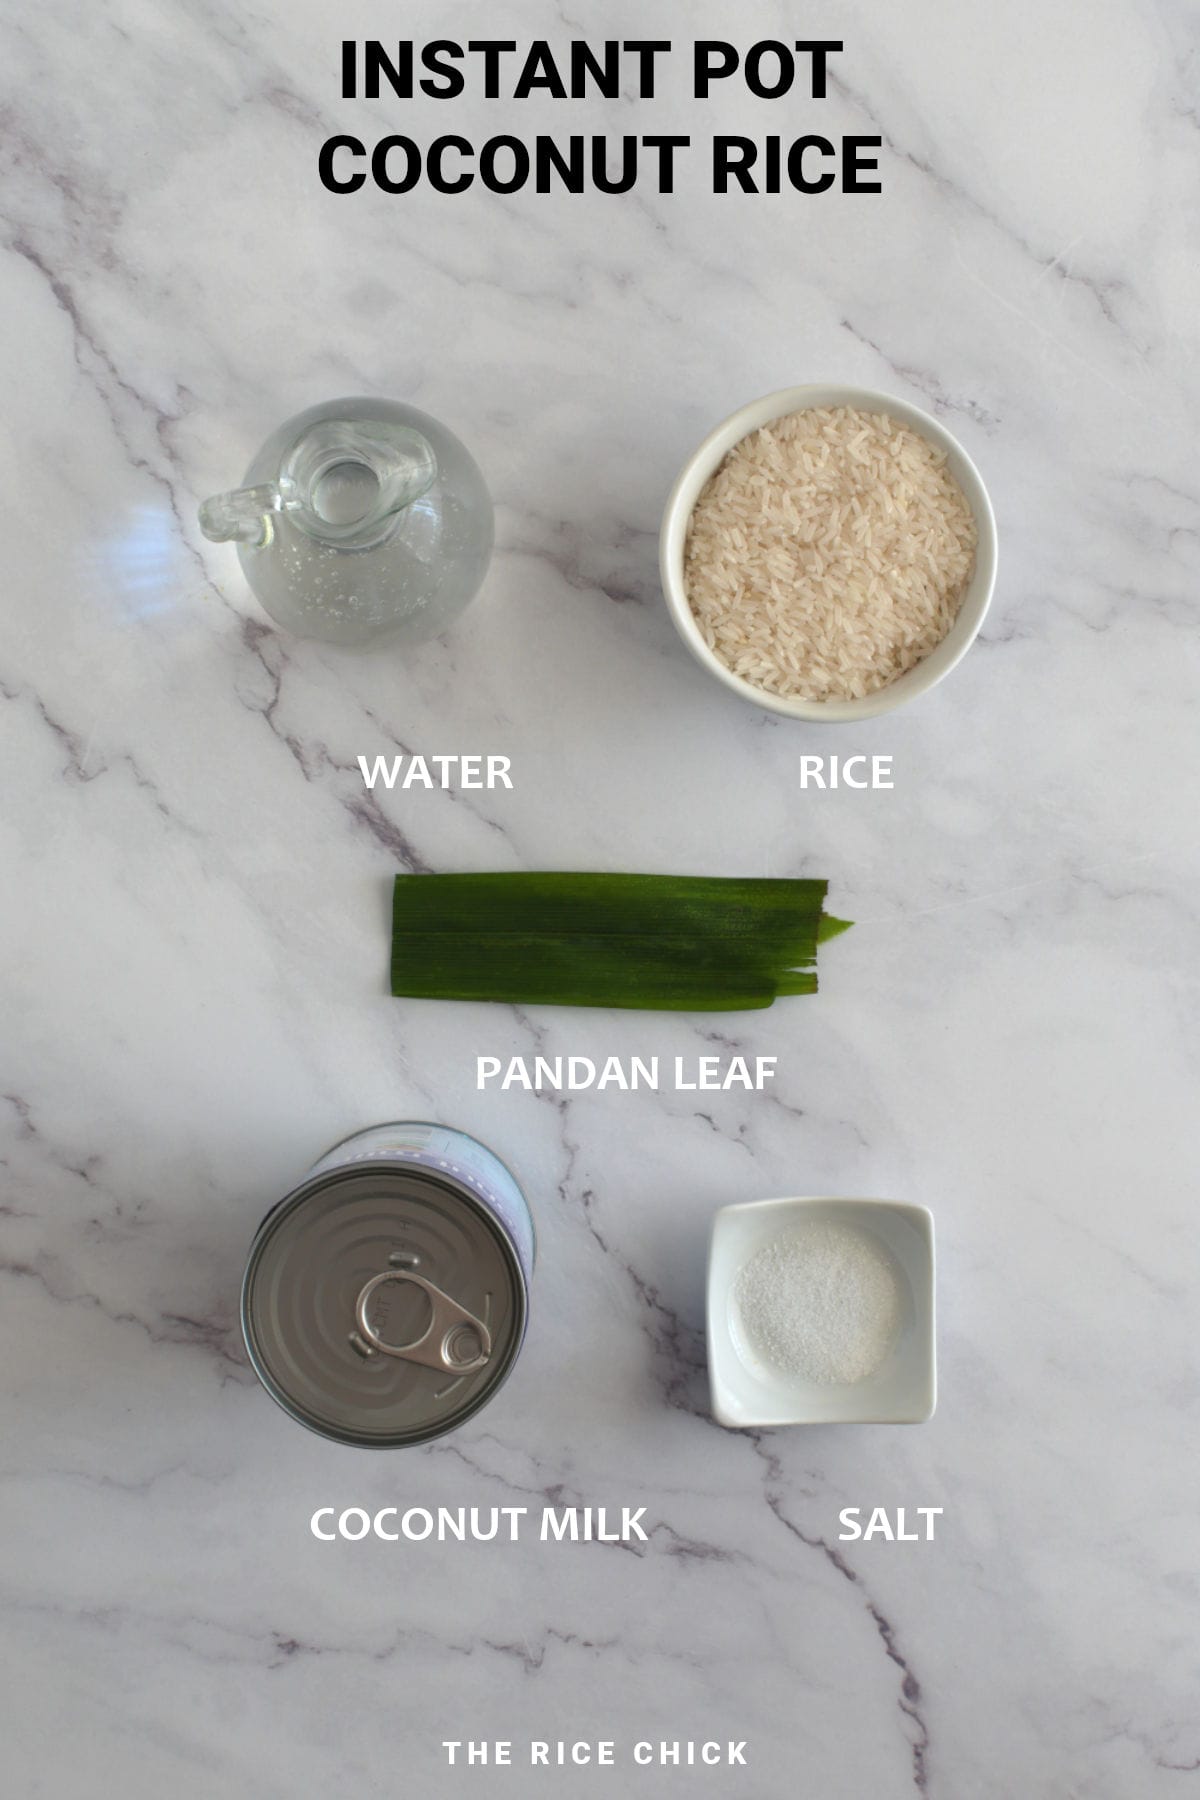 Ingredients for Instant Pot coconut rice.